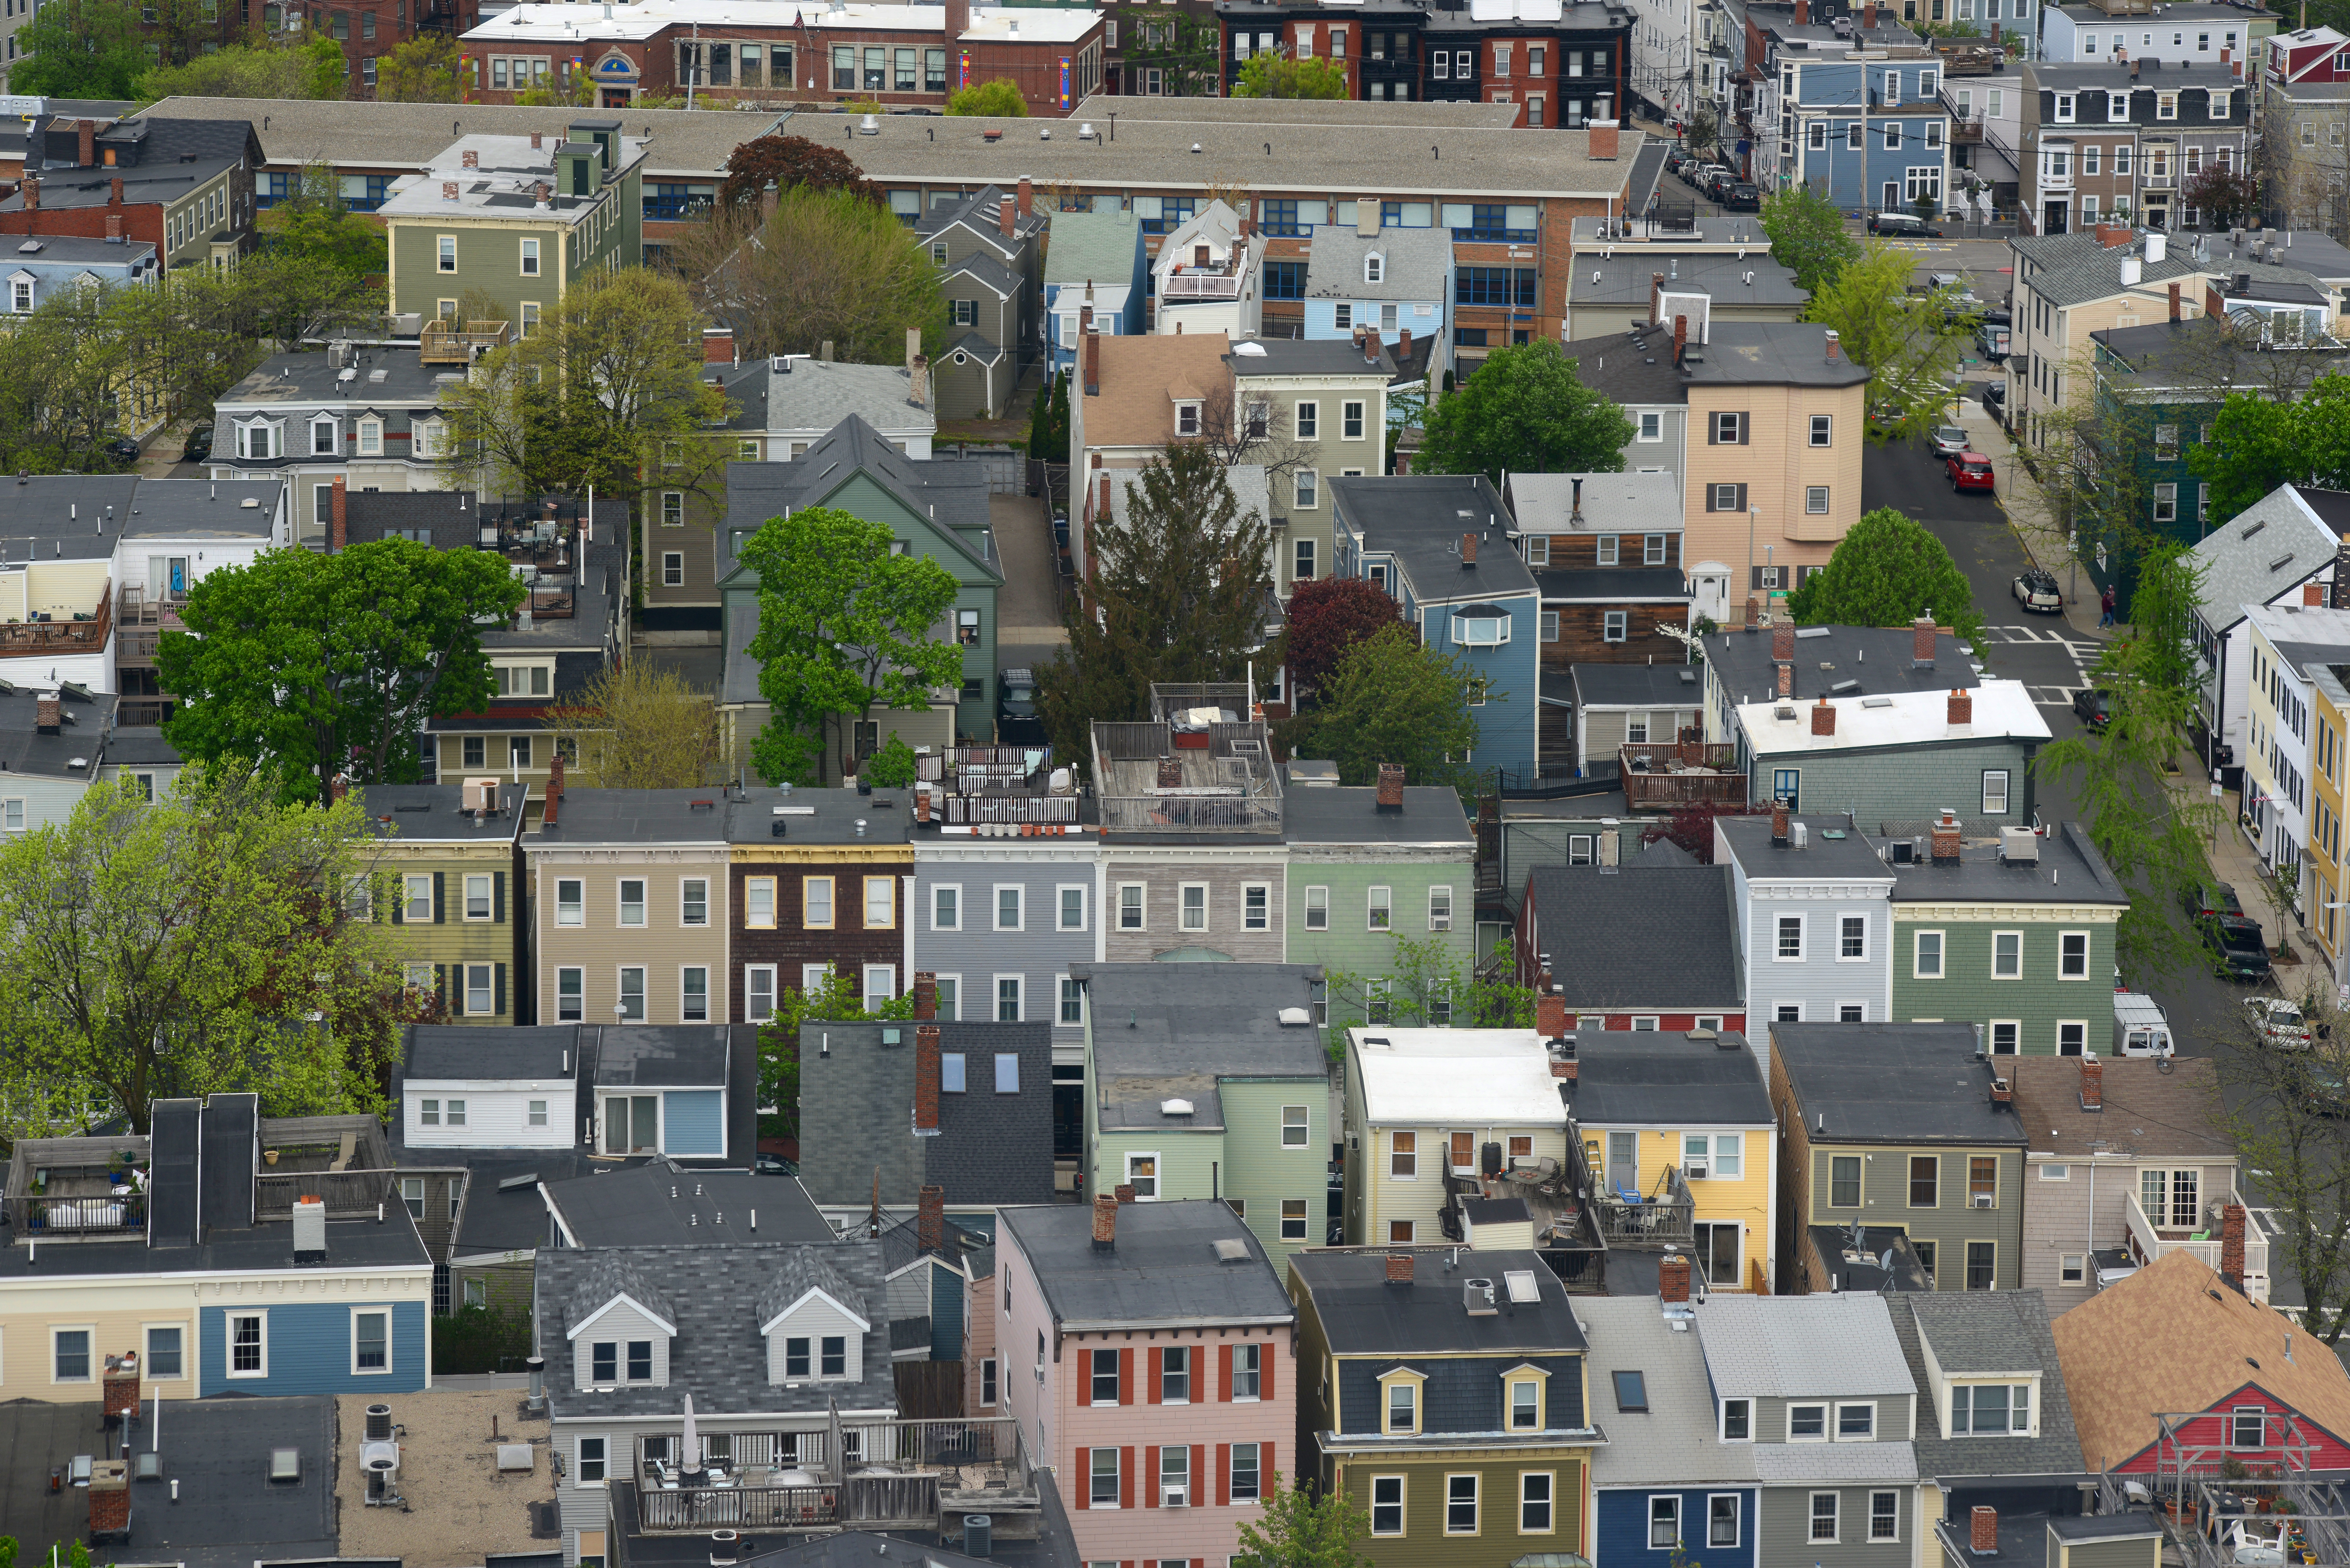 Aerial view of rows of small apartment buildings.